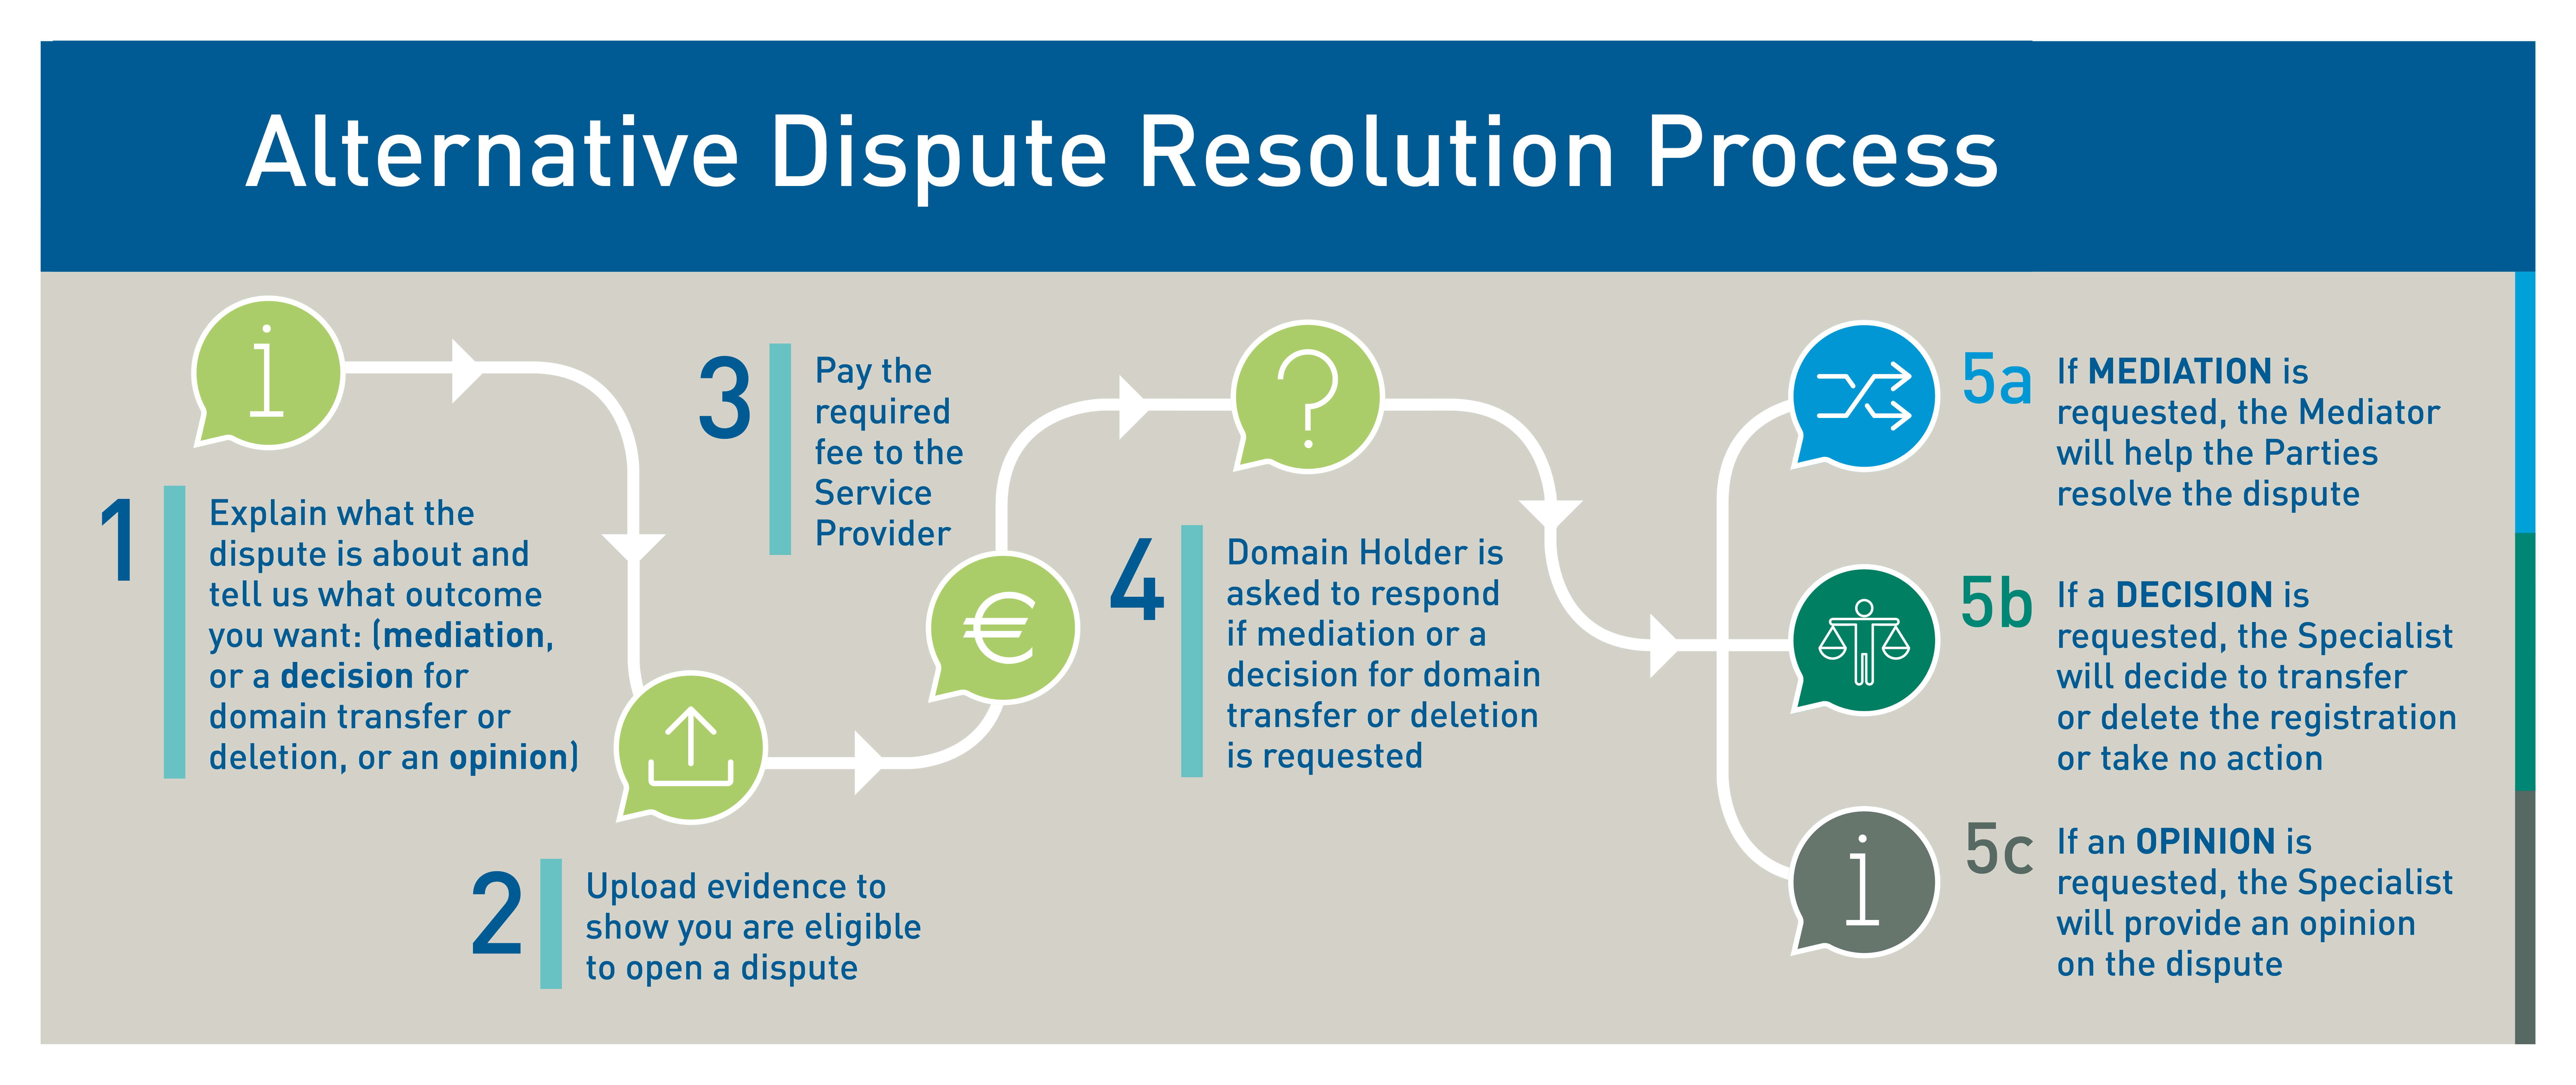 Alternative Dispute Resolution Process Graphic: How does it work?